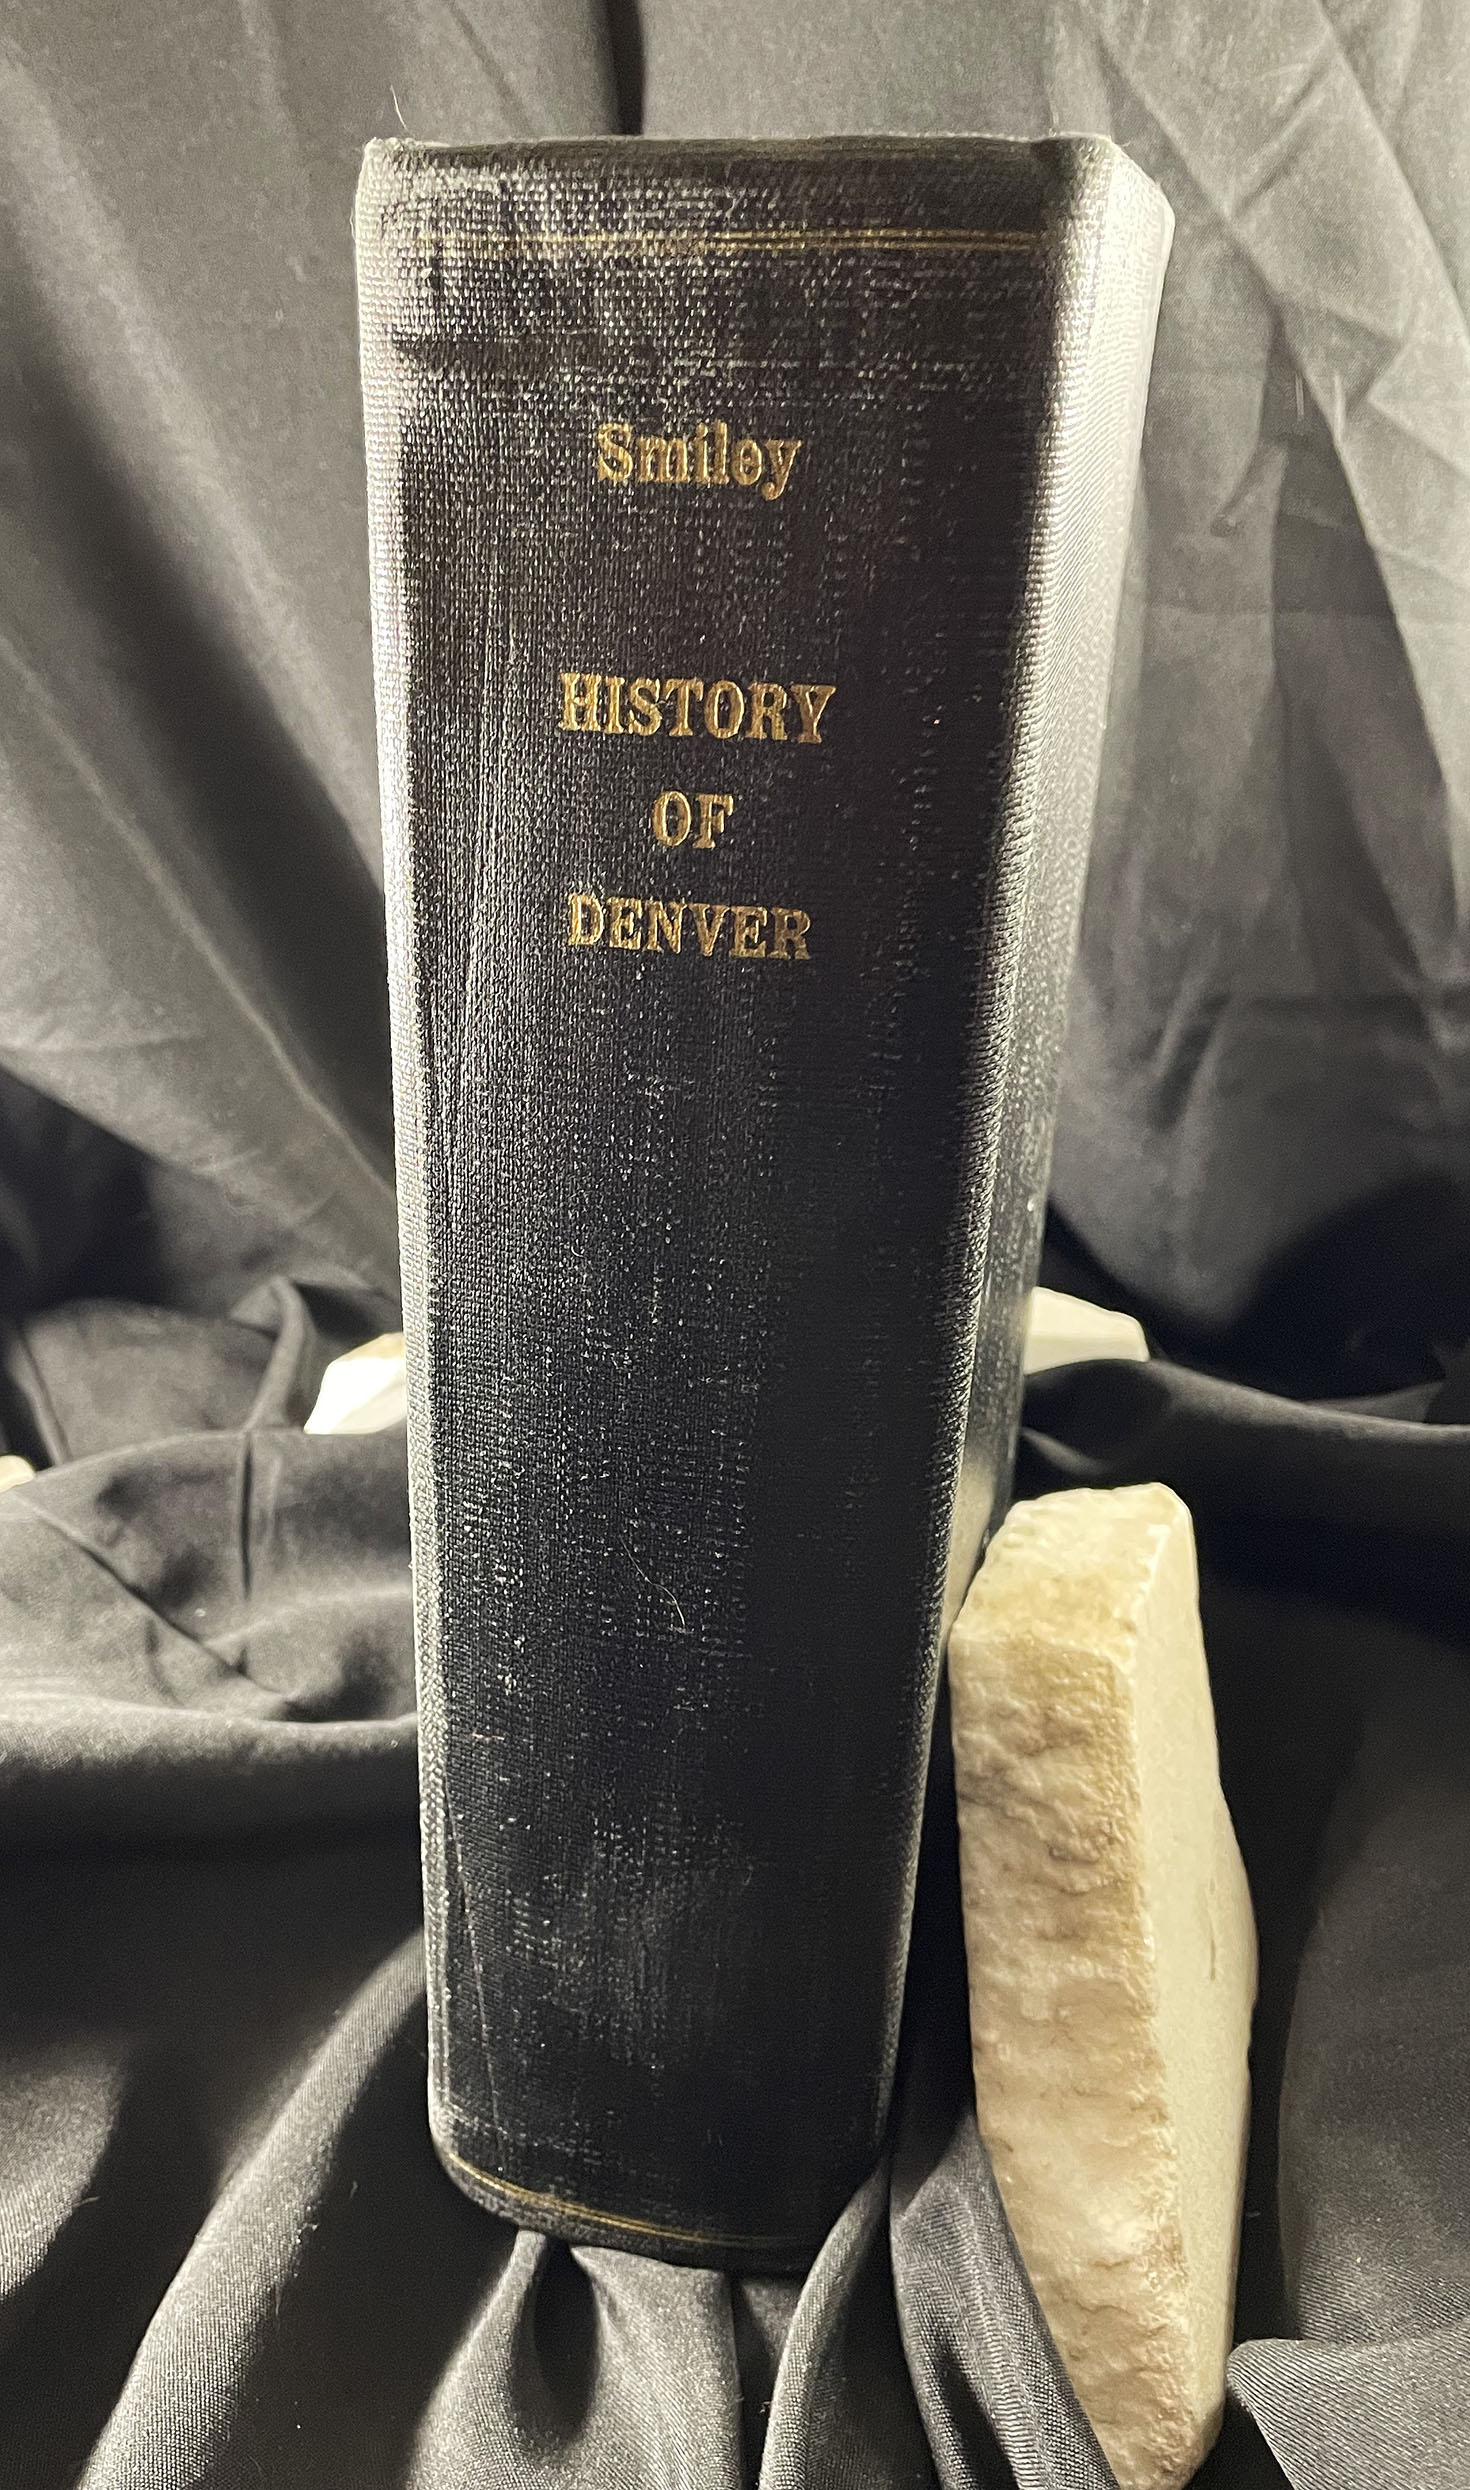 HISTORY OF DENVER COLORADO JEROME C. SMILEY first edition book 1901